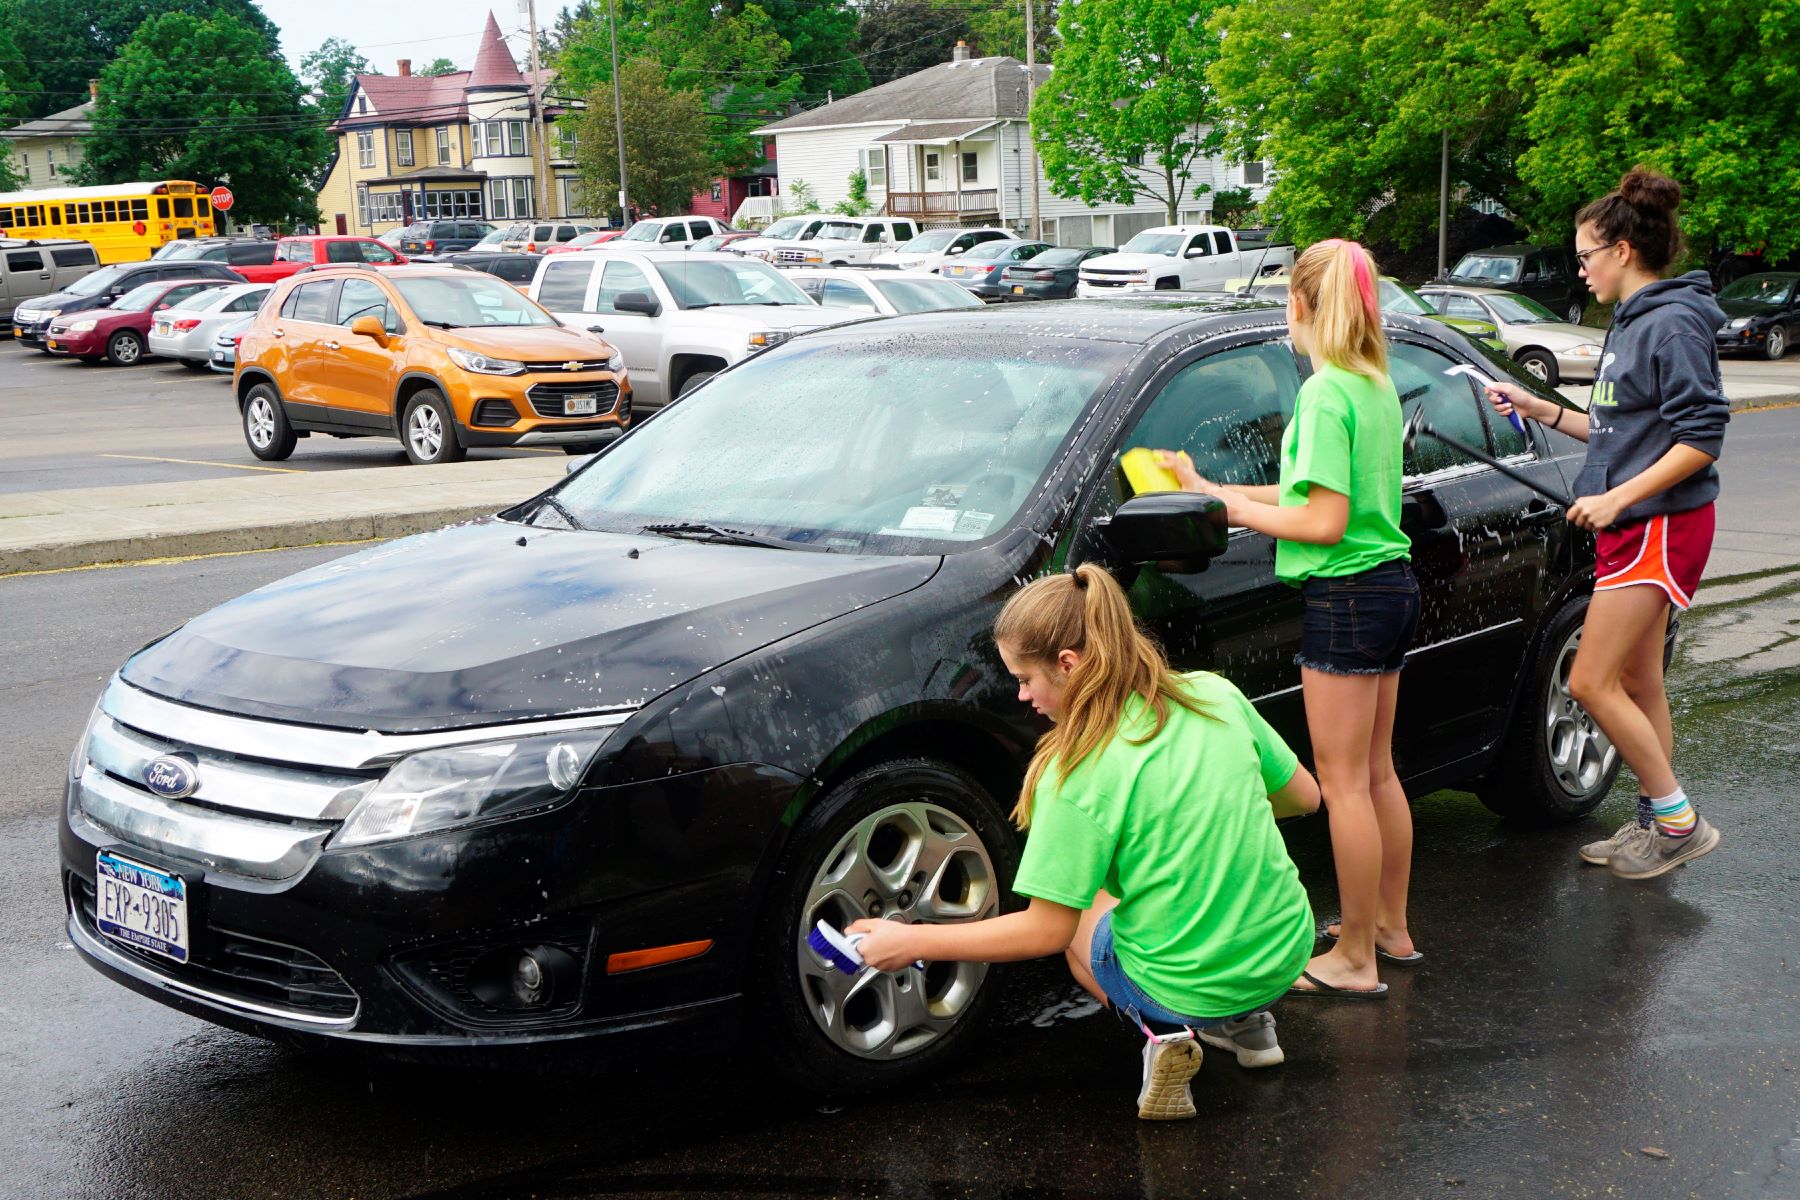 Middle school students washing cars for community service in Wellsville, New York